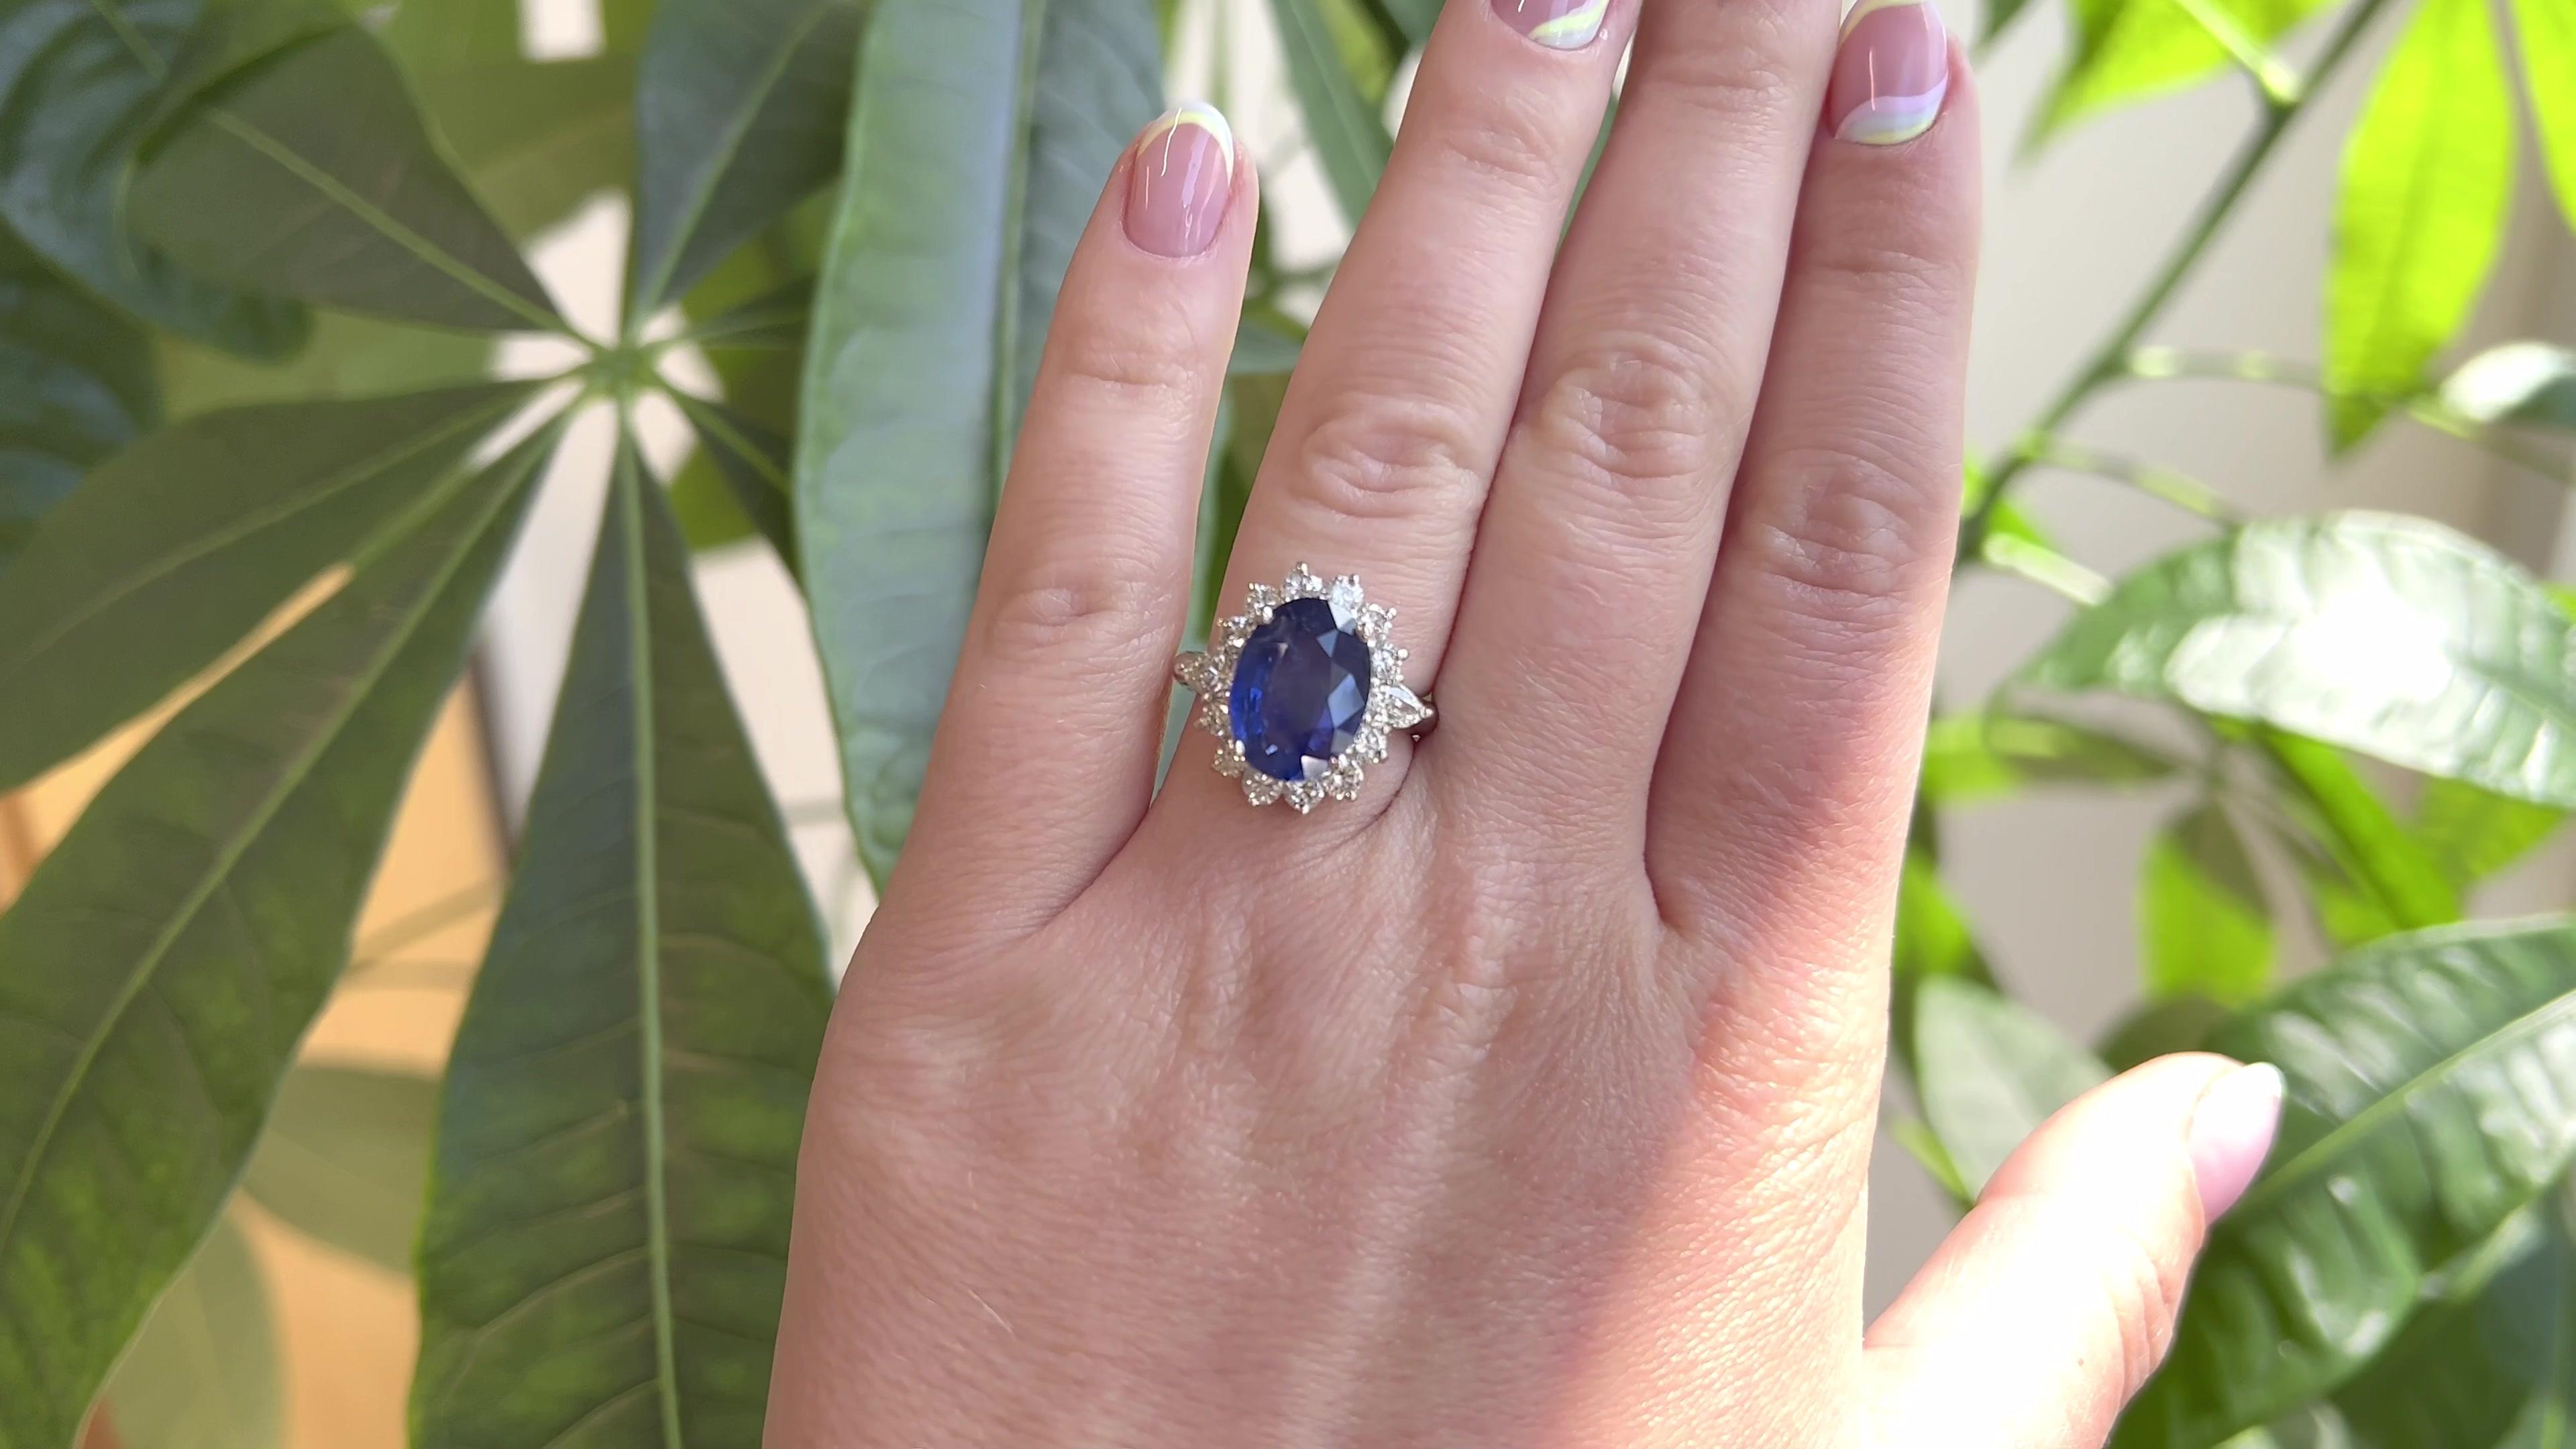 One Vintage GIA Ceylon Oval Sapphire Diamond Platinum Cluster Ring. Featuring one GIA certified oval shaped sapphire of 6.02 carats, accompanied with certificate #6227417803 stating the sapphire is of Ceylon origin. Accented by two pear shape cut